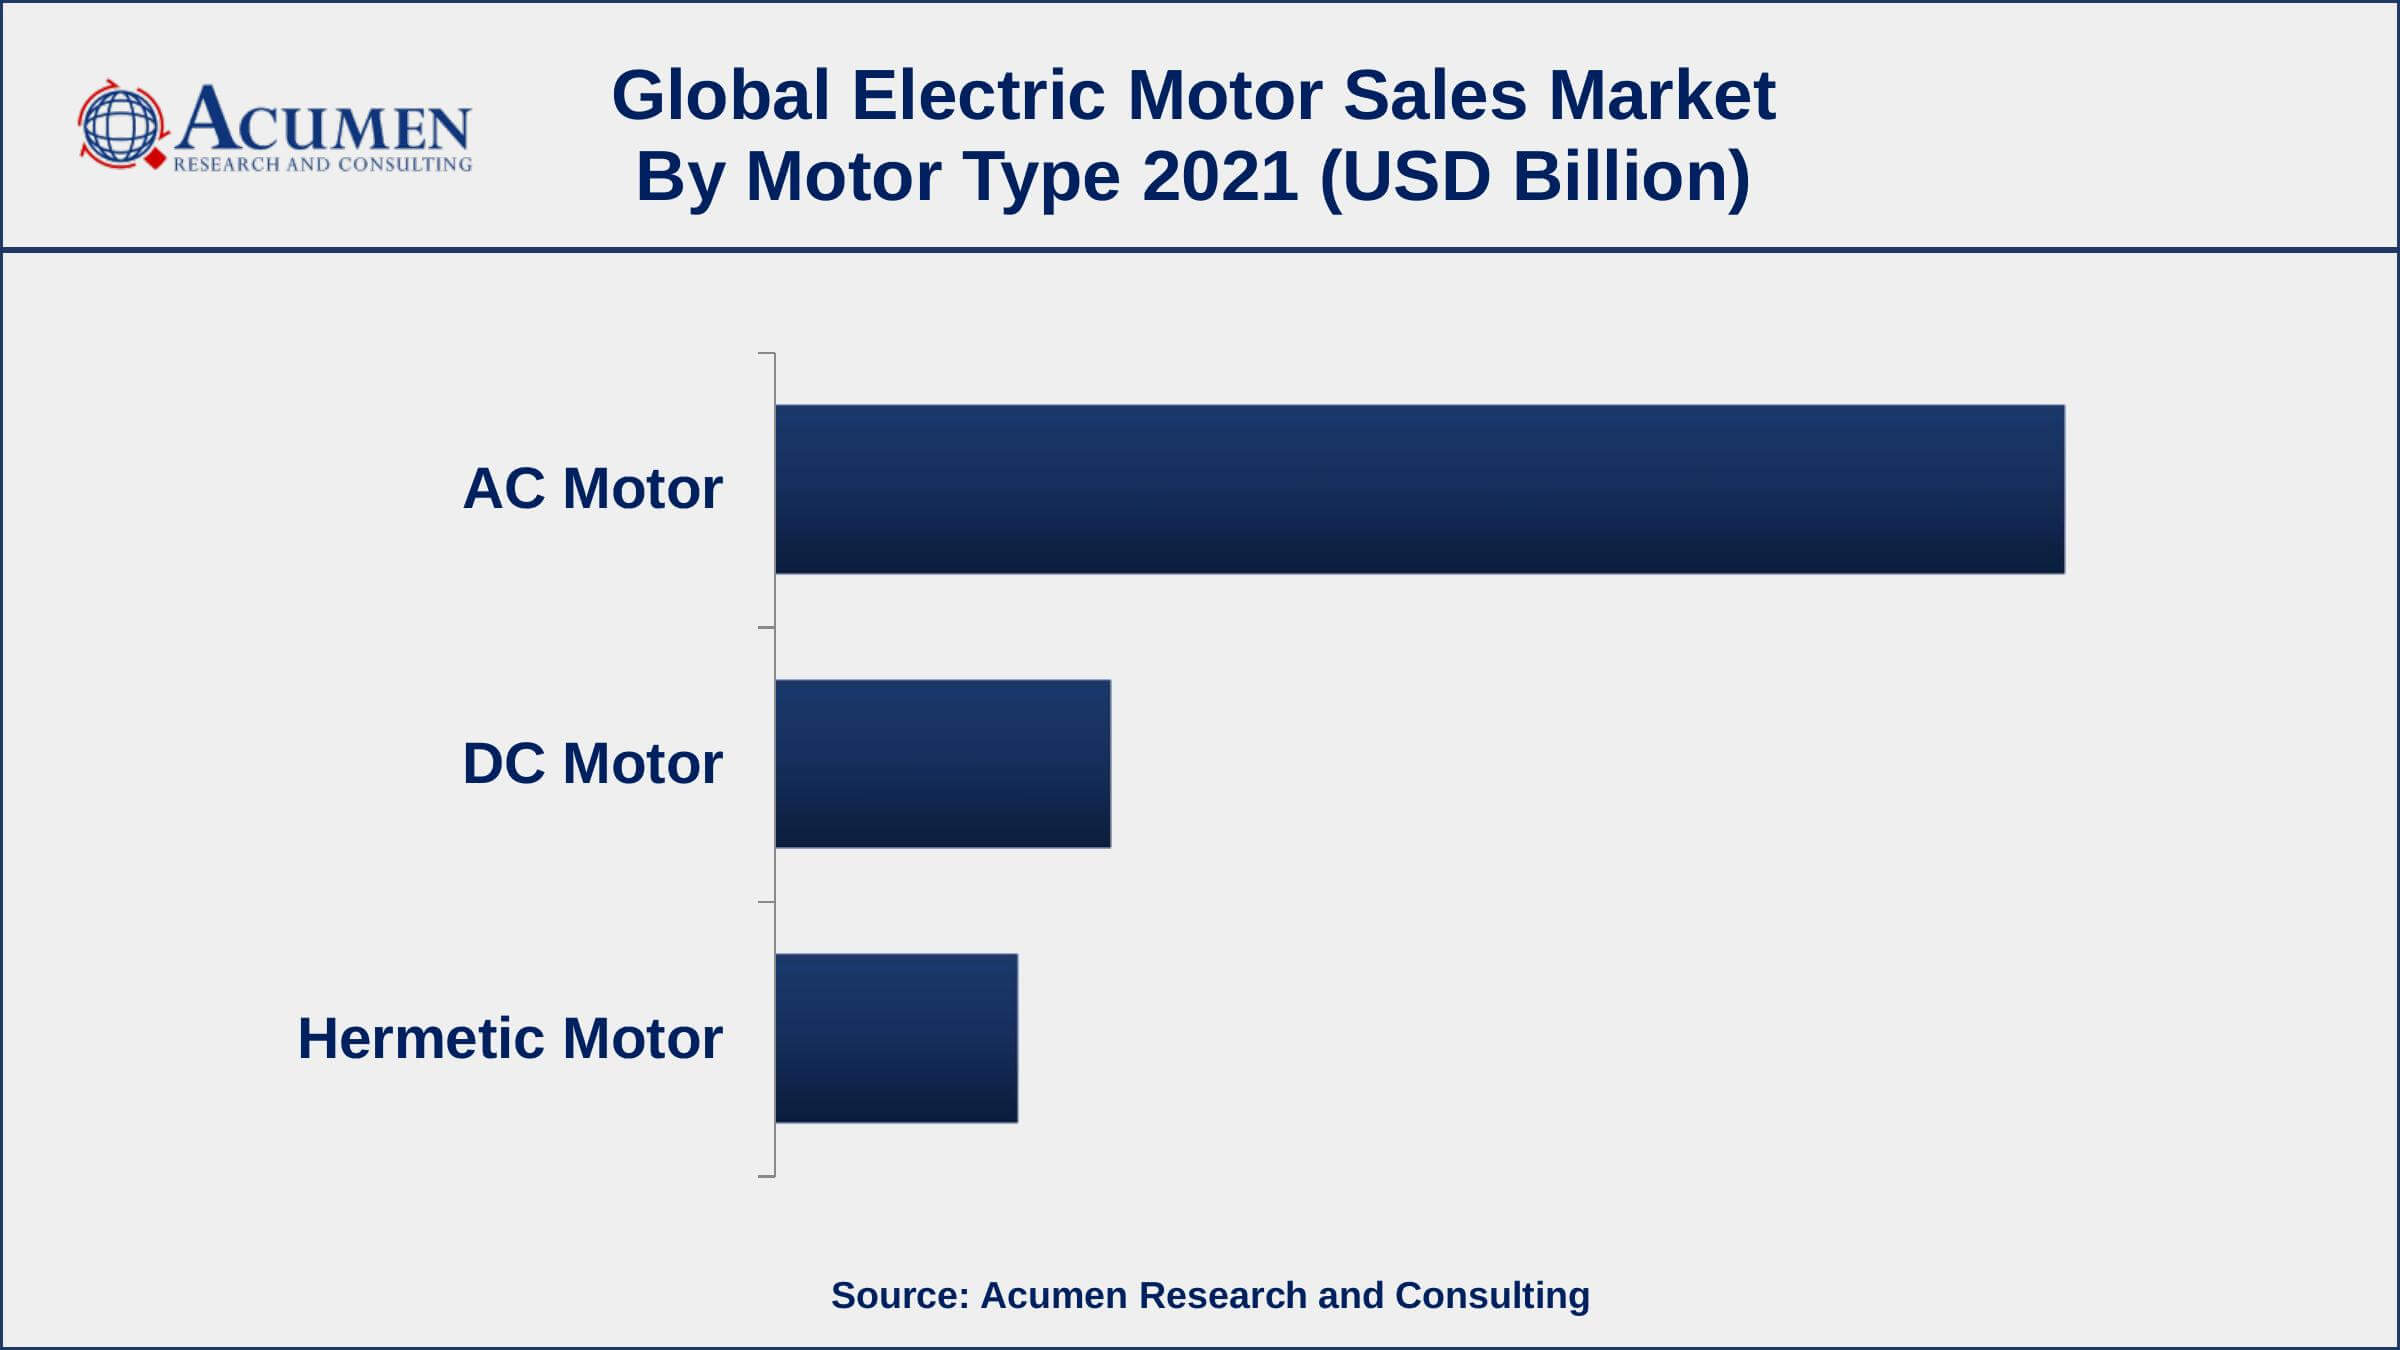 By motor type, the AC motor segment has accounted market share of over 69% in 2021